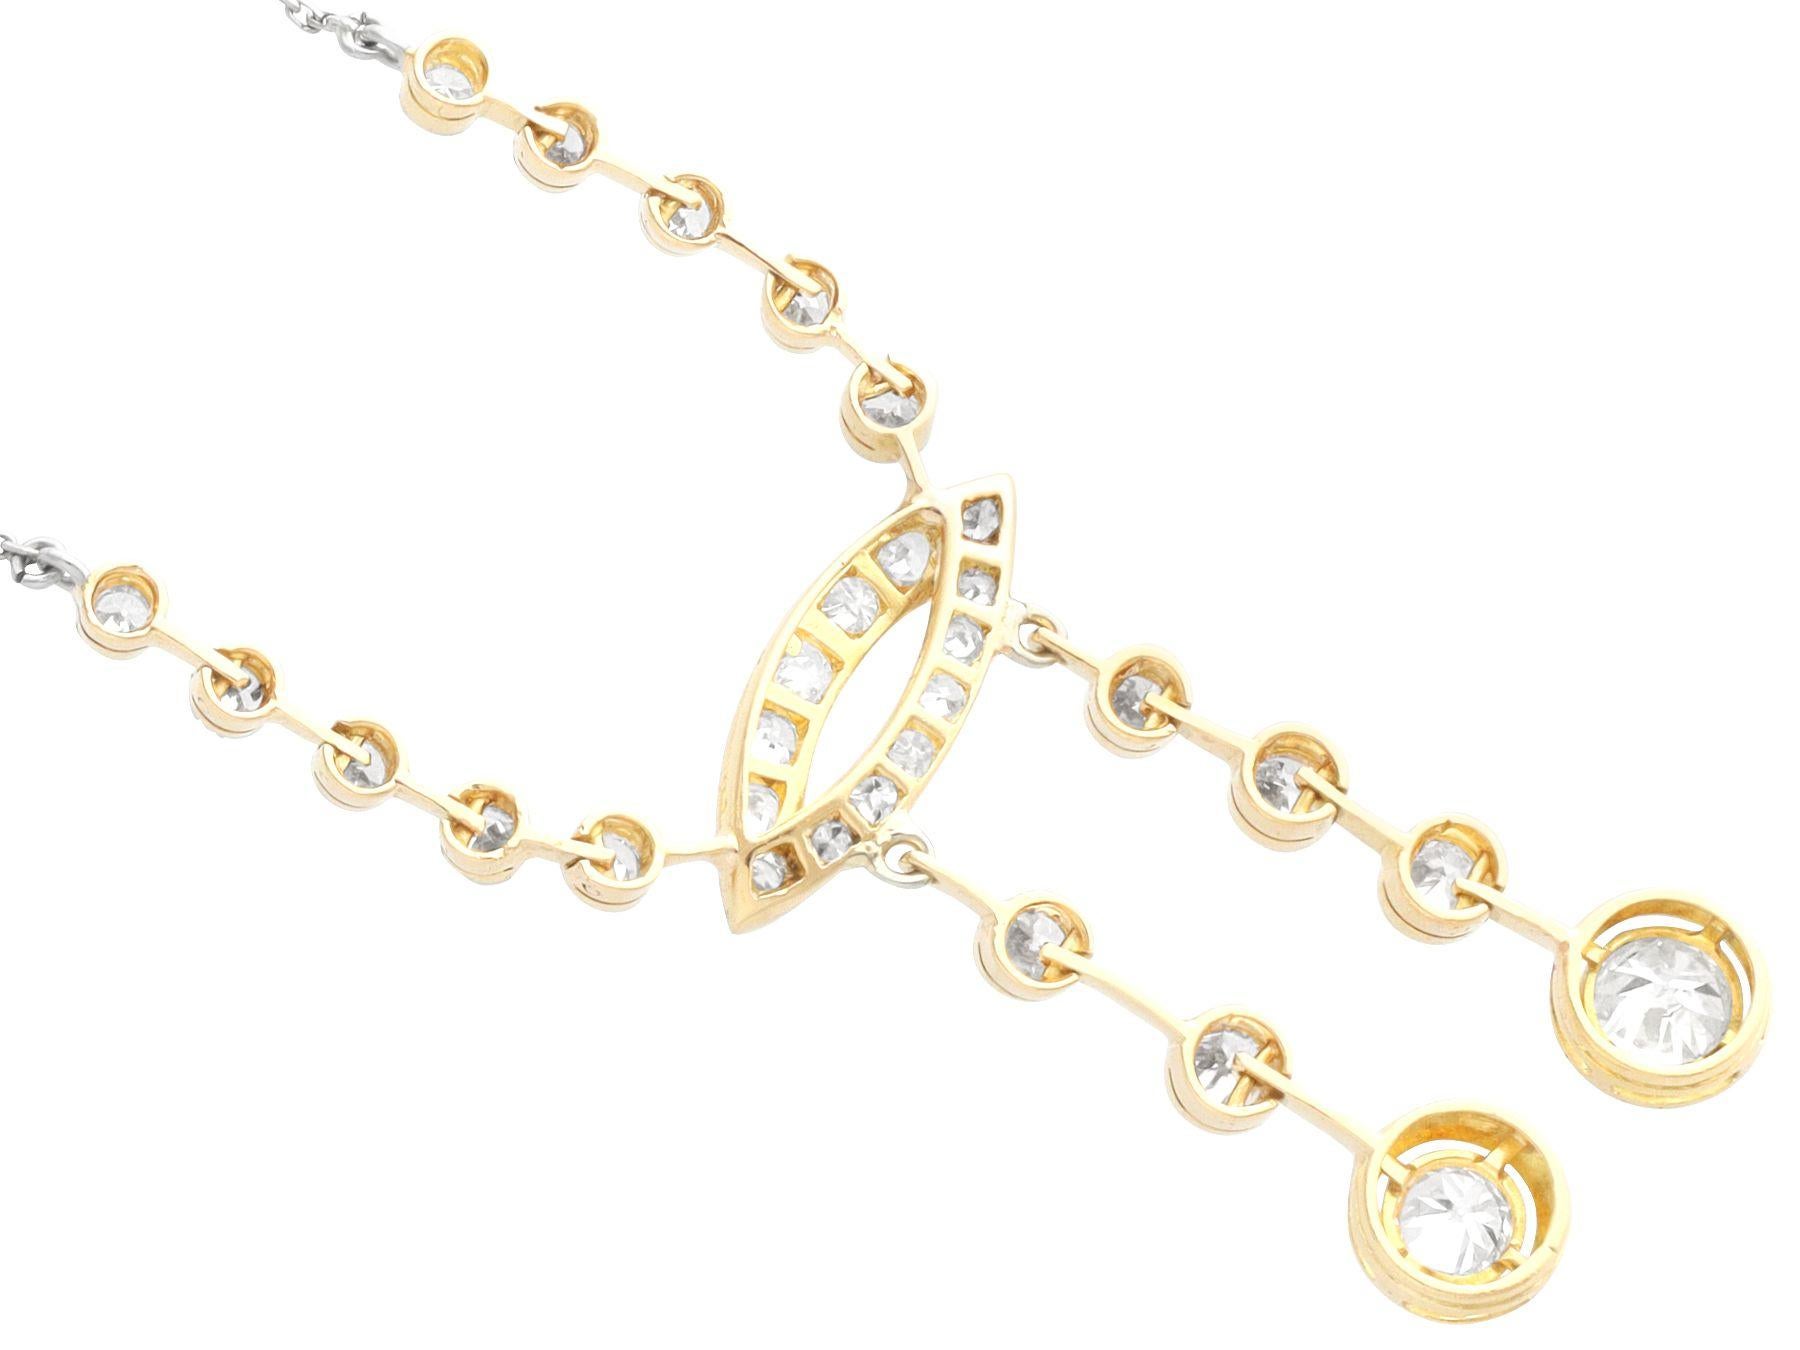 Antique 4.13 Carat Diamond and Yellow Gold Necklace For Sale 1